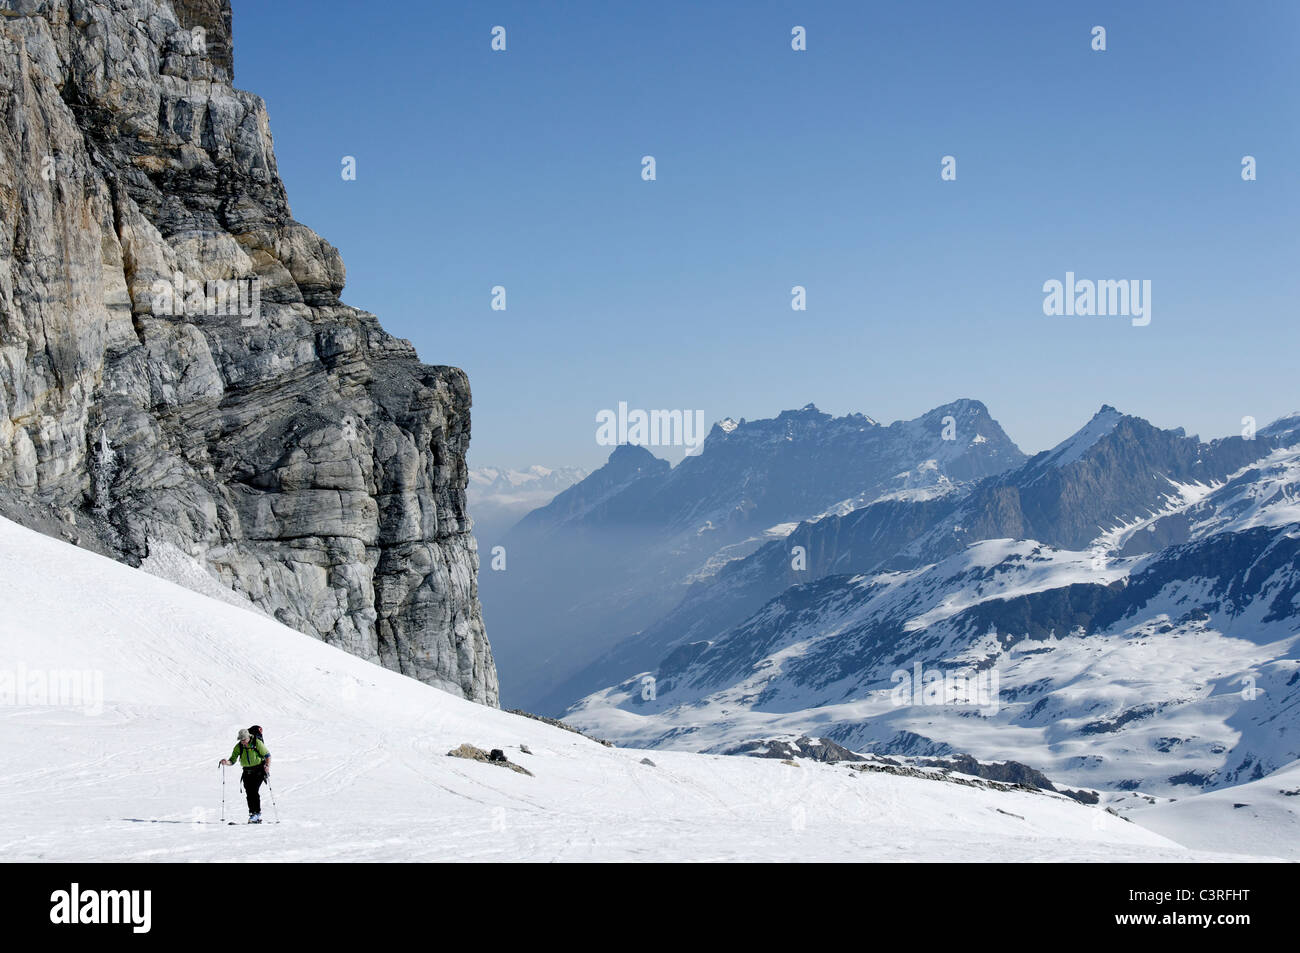 Enjoying a fine day of spring ski touring of Punta Calabre in the Gran Paradiso National Park, Italy. Stock Photo